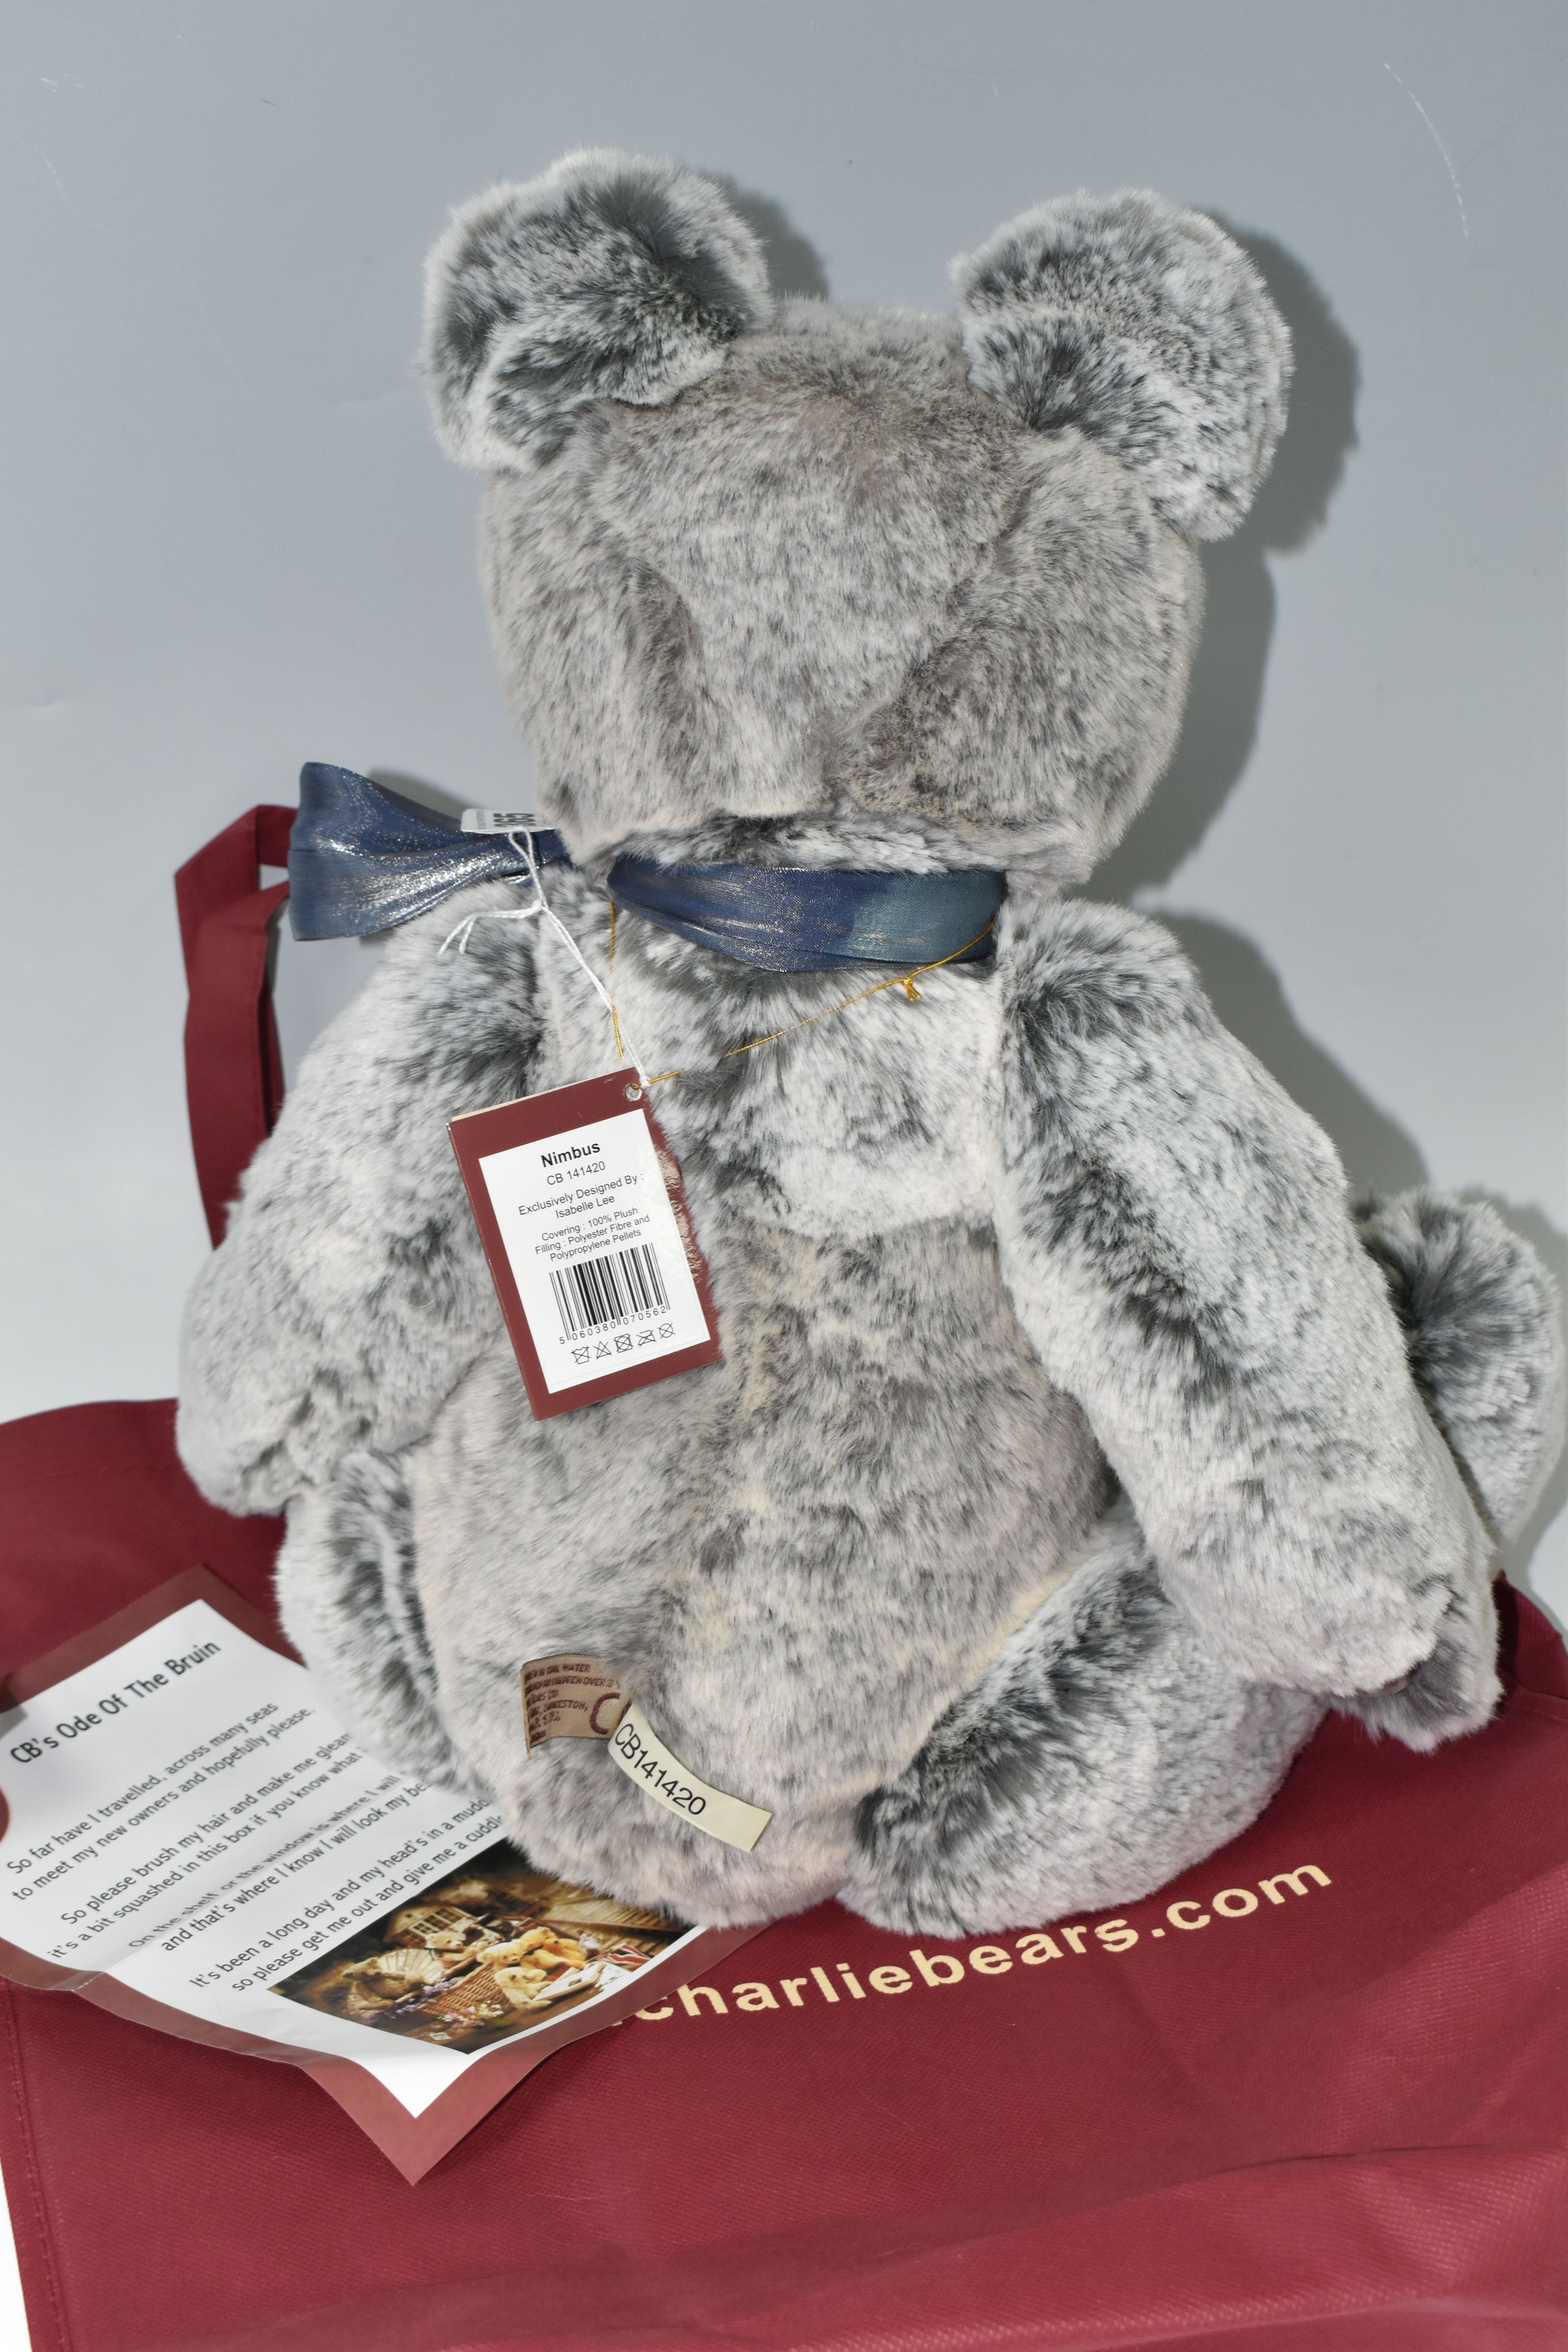 A CHARLIE BEAR 'NIMBUS' BEAR, CB 141420 designed by Isabelle Lee, with original dust bag and - Image 3 of 3